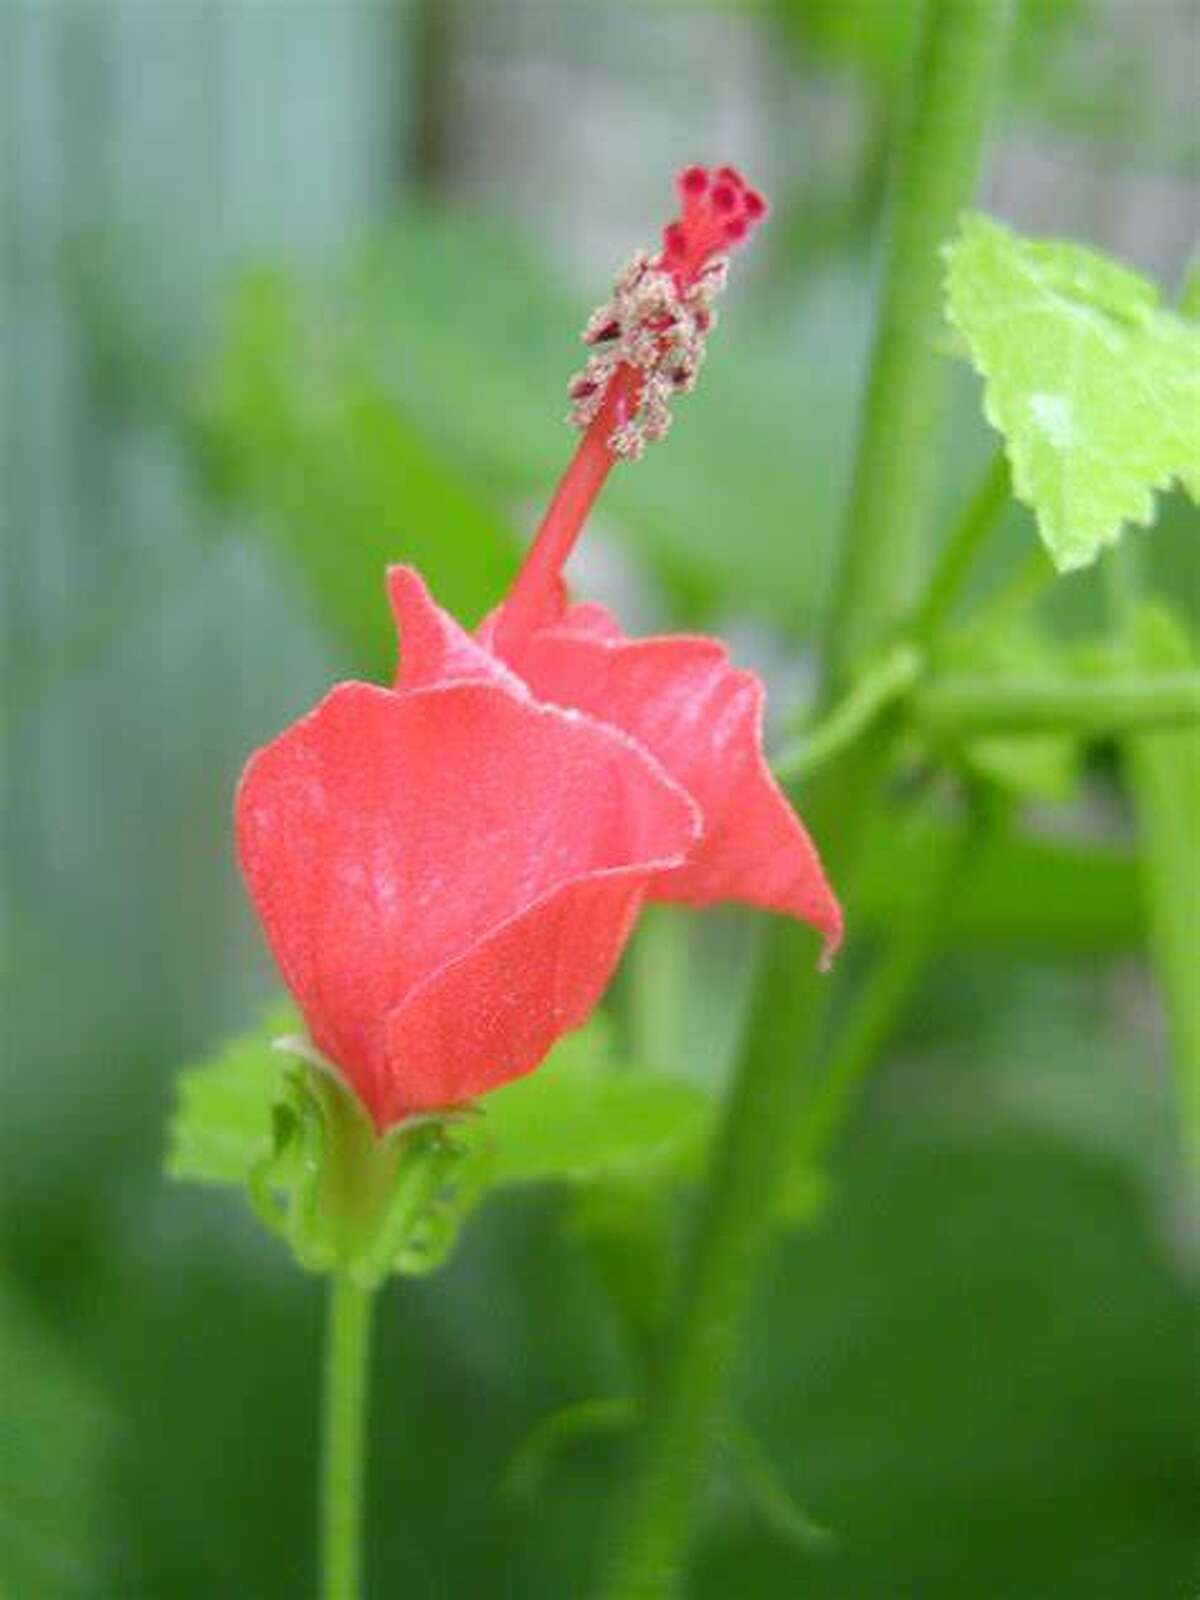 Turk’s Cap is available in spring and summer at most local nurseries.